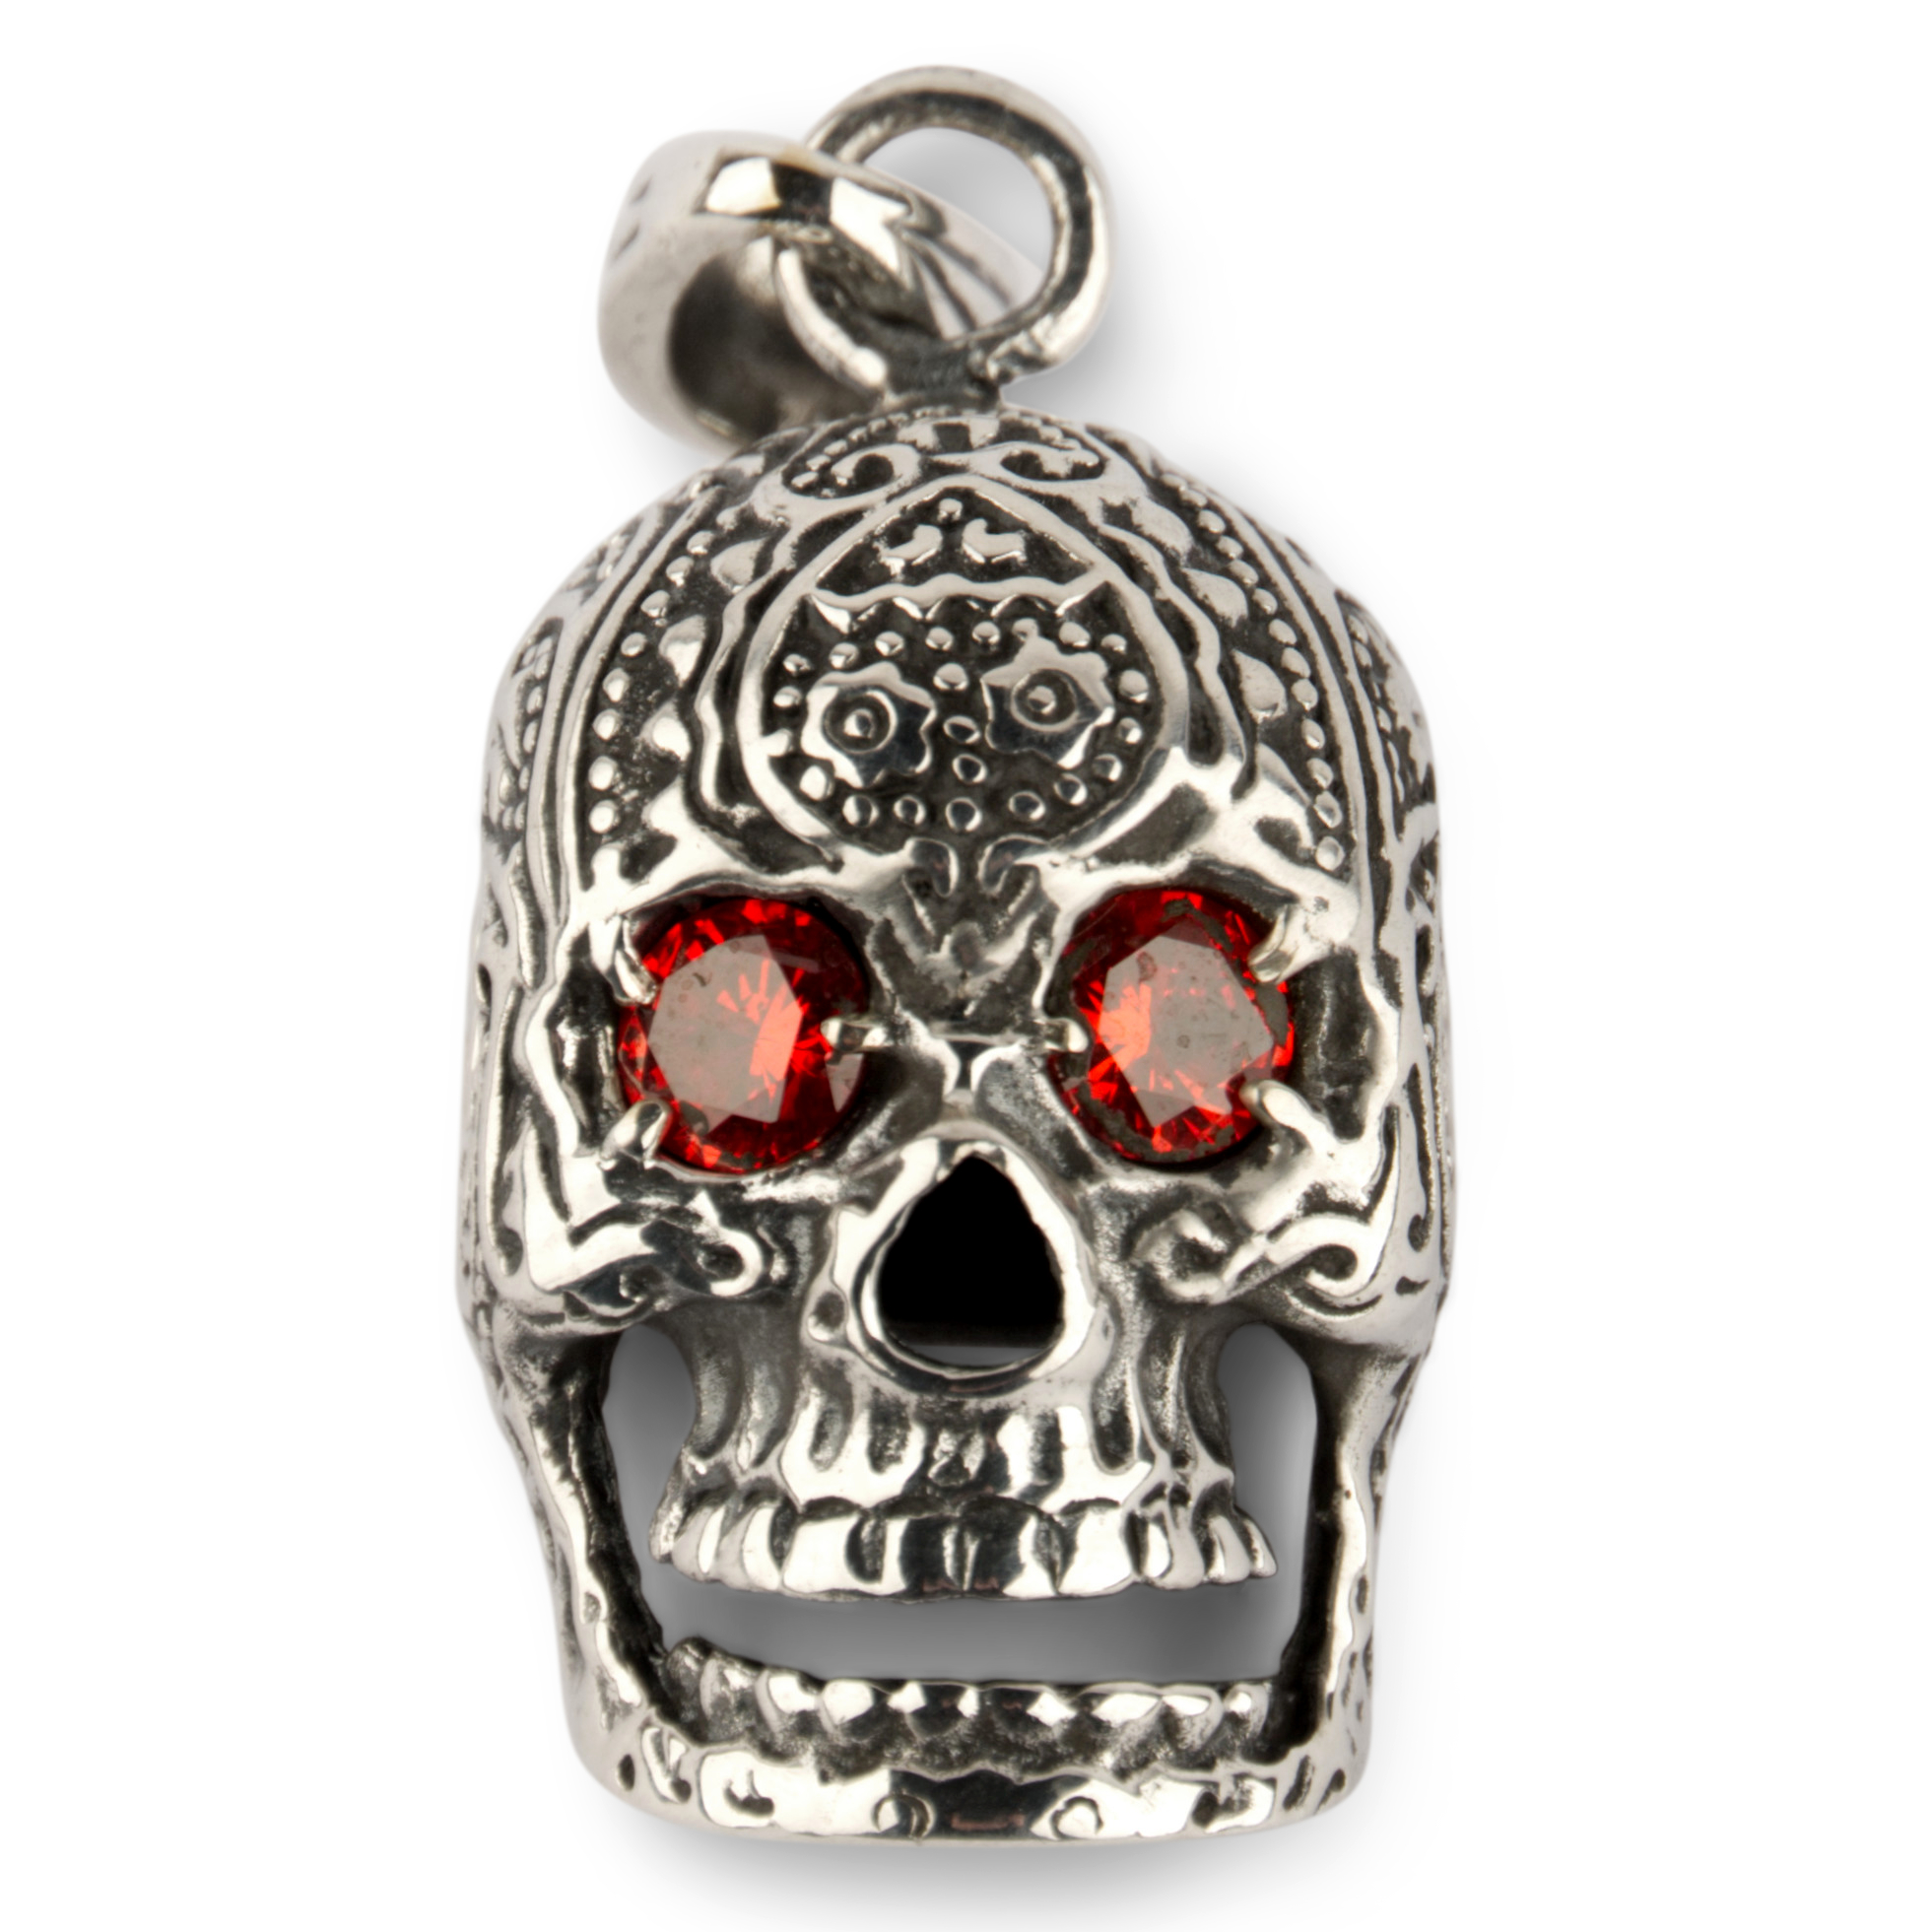 Tribal Skull Red Crystal Eyes Silver Pewter Pendant Necklace NK-468 SALE